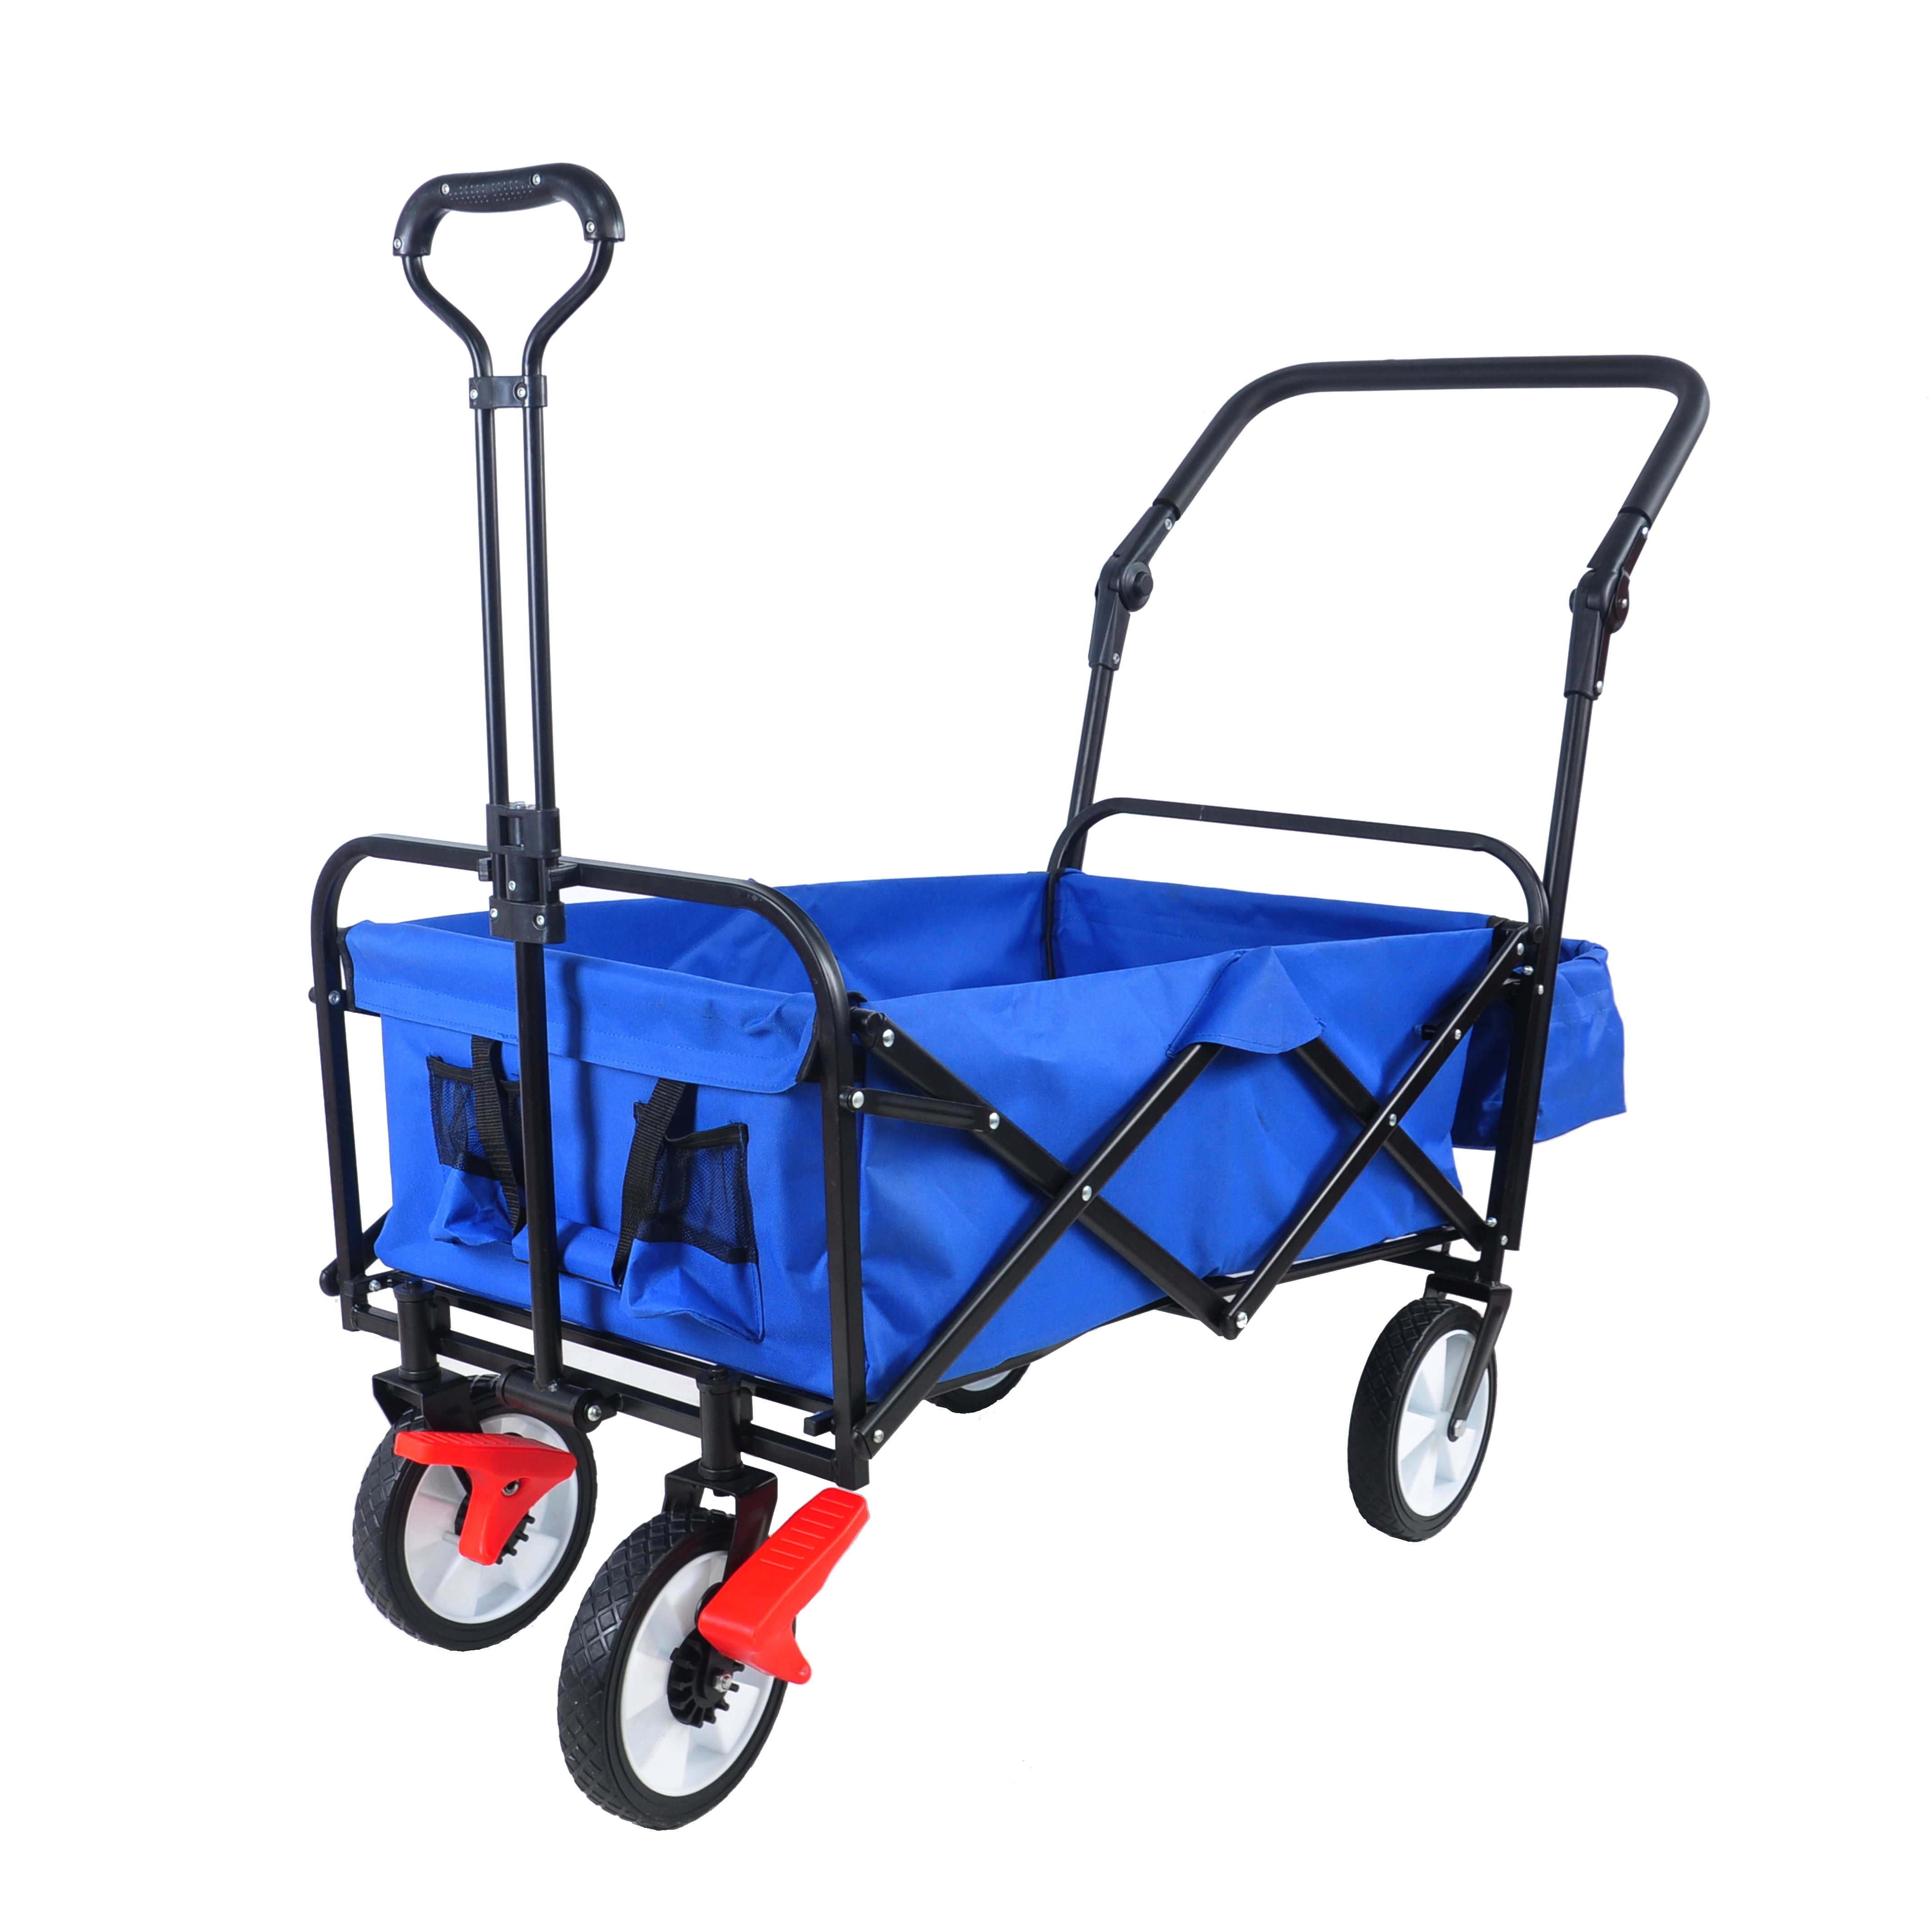 CLEARANCE! folding wagon Collapsible Outdoor Utility Wagon, Heavy Duty  Folding Garden Portable Hand Cart, Drink Holder, Adjustable Handles